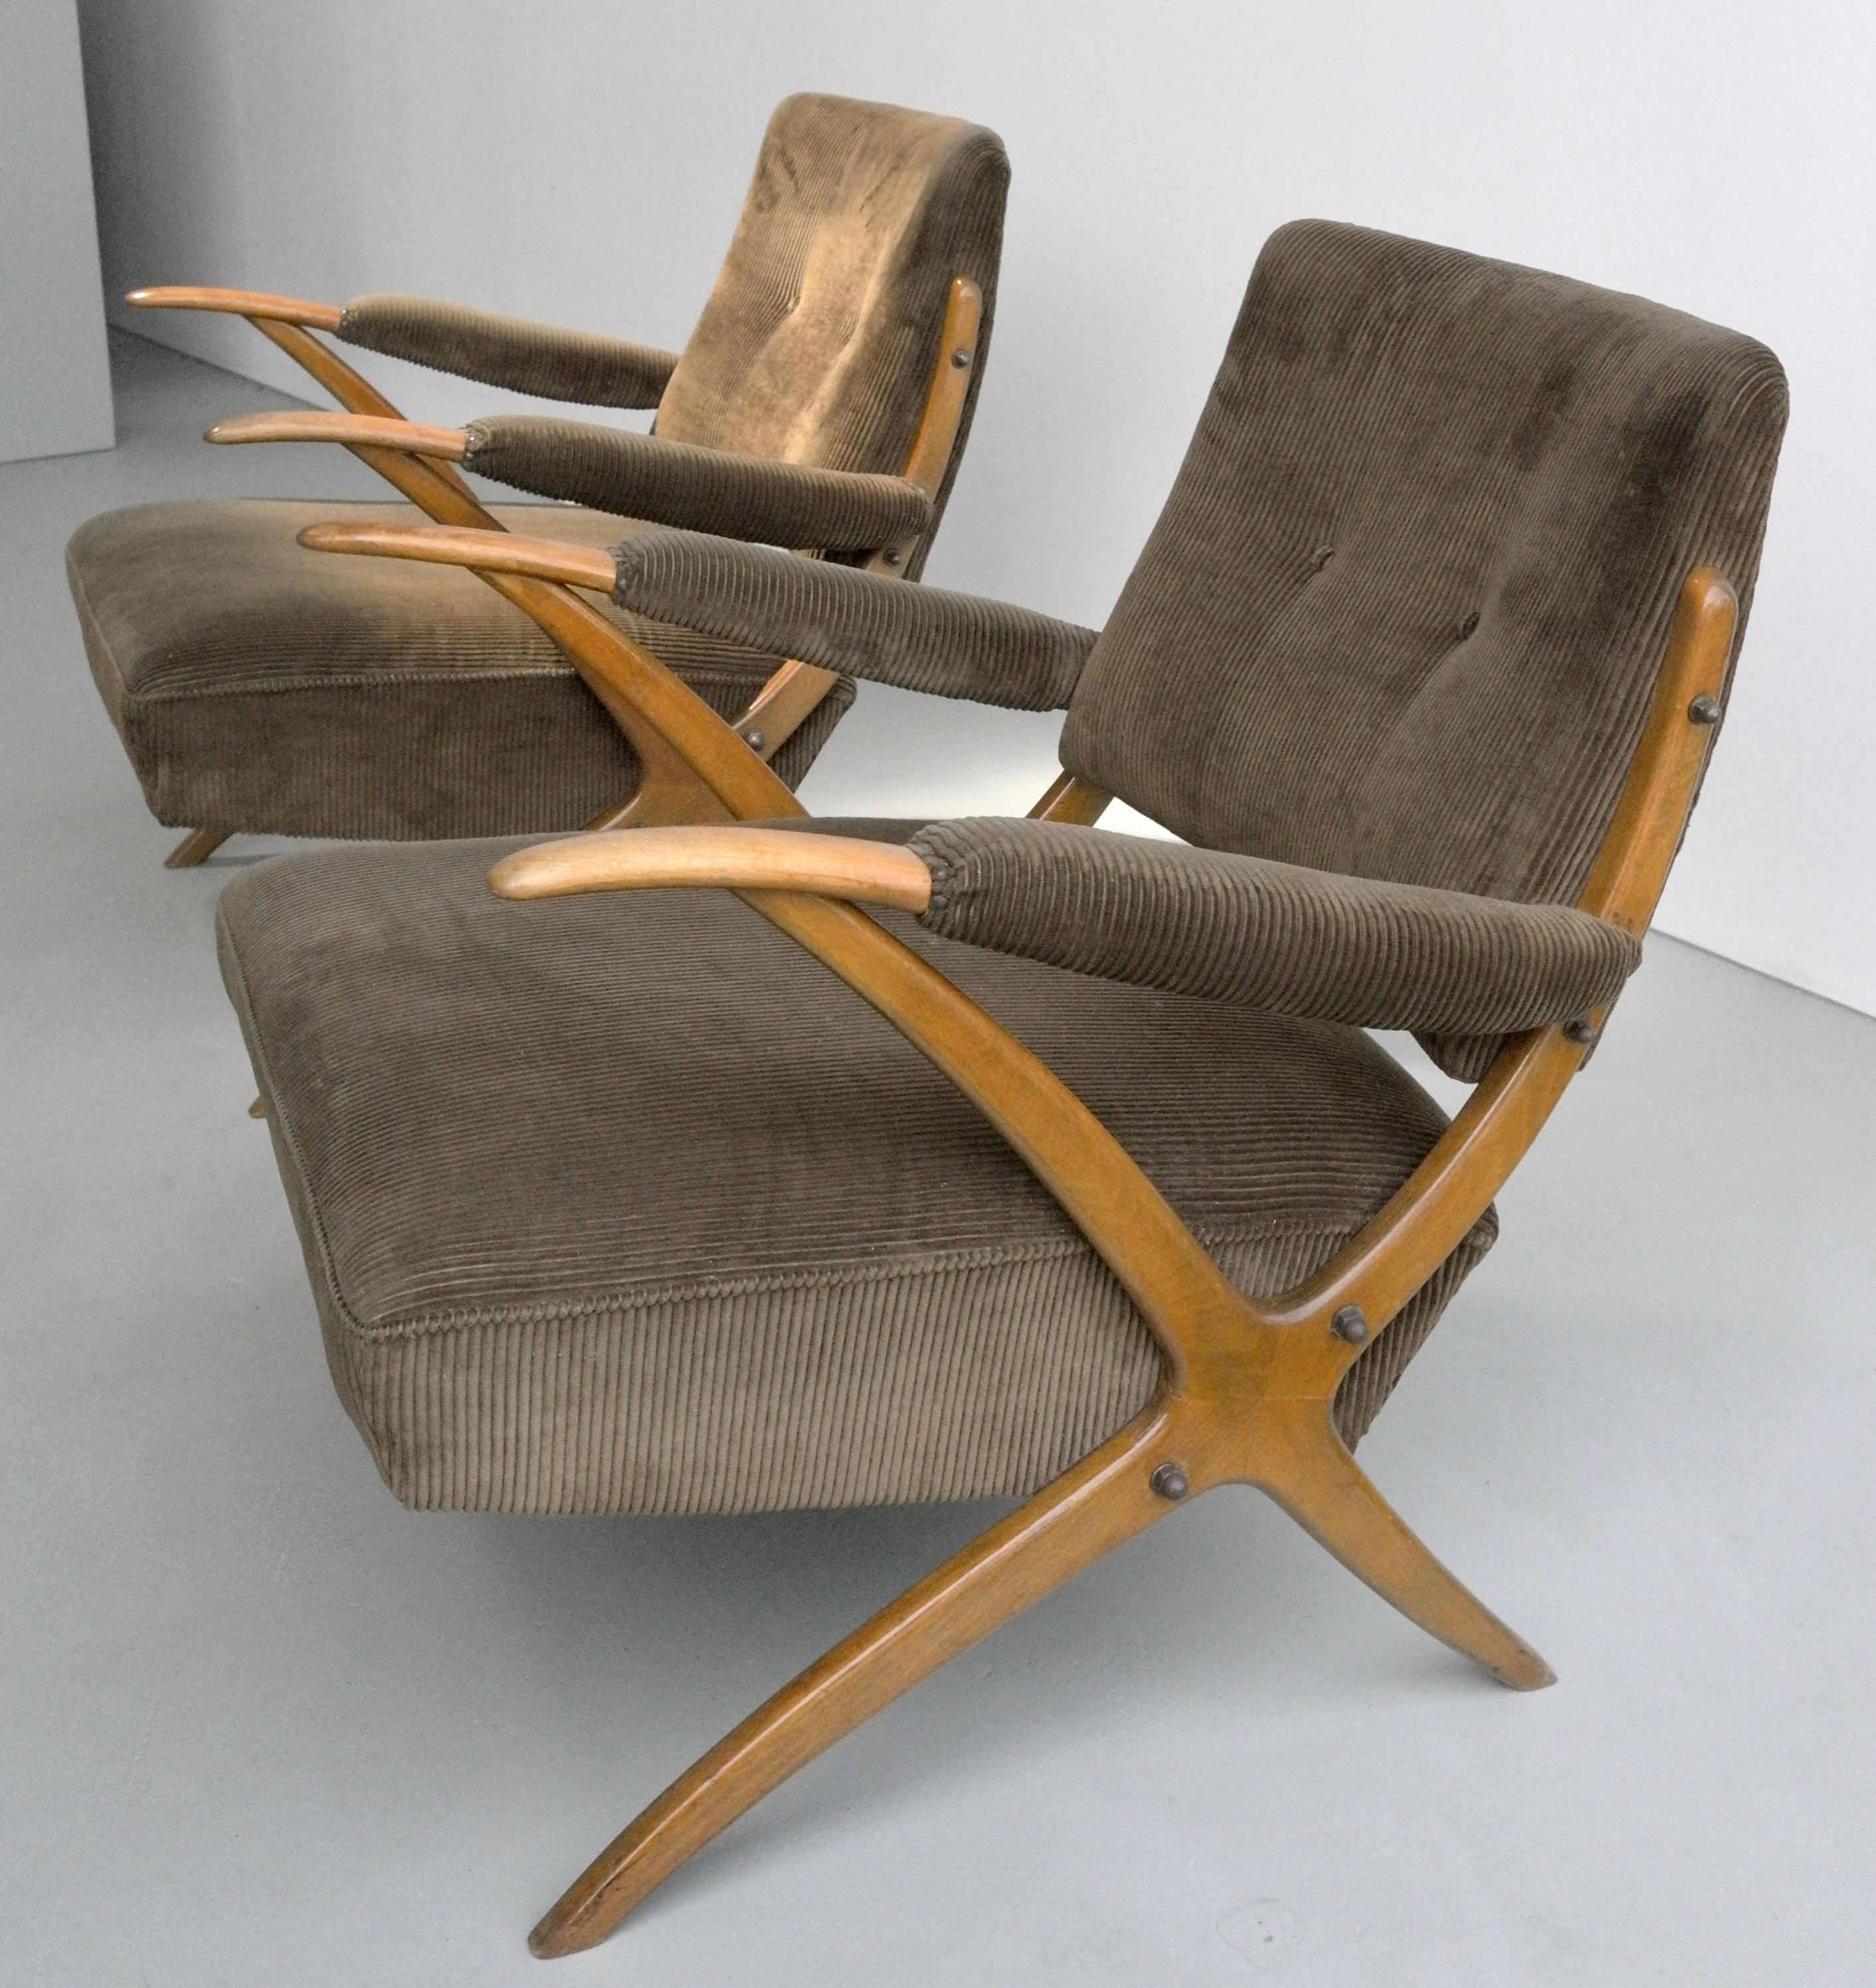 Rare rReinhold Stotz pair of wooden curved cross-frame lounge chairs, 1950s
For the touch we kept the original upholstery from this rare pair of lounge chairs.
Imagine these with a velvet-abundant upholstery, suitable in any midcentury or modern